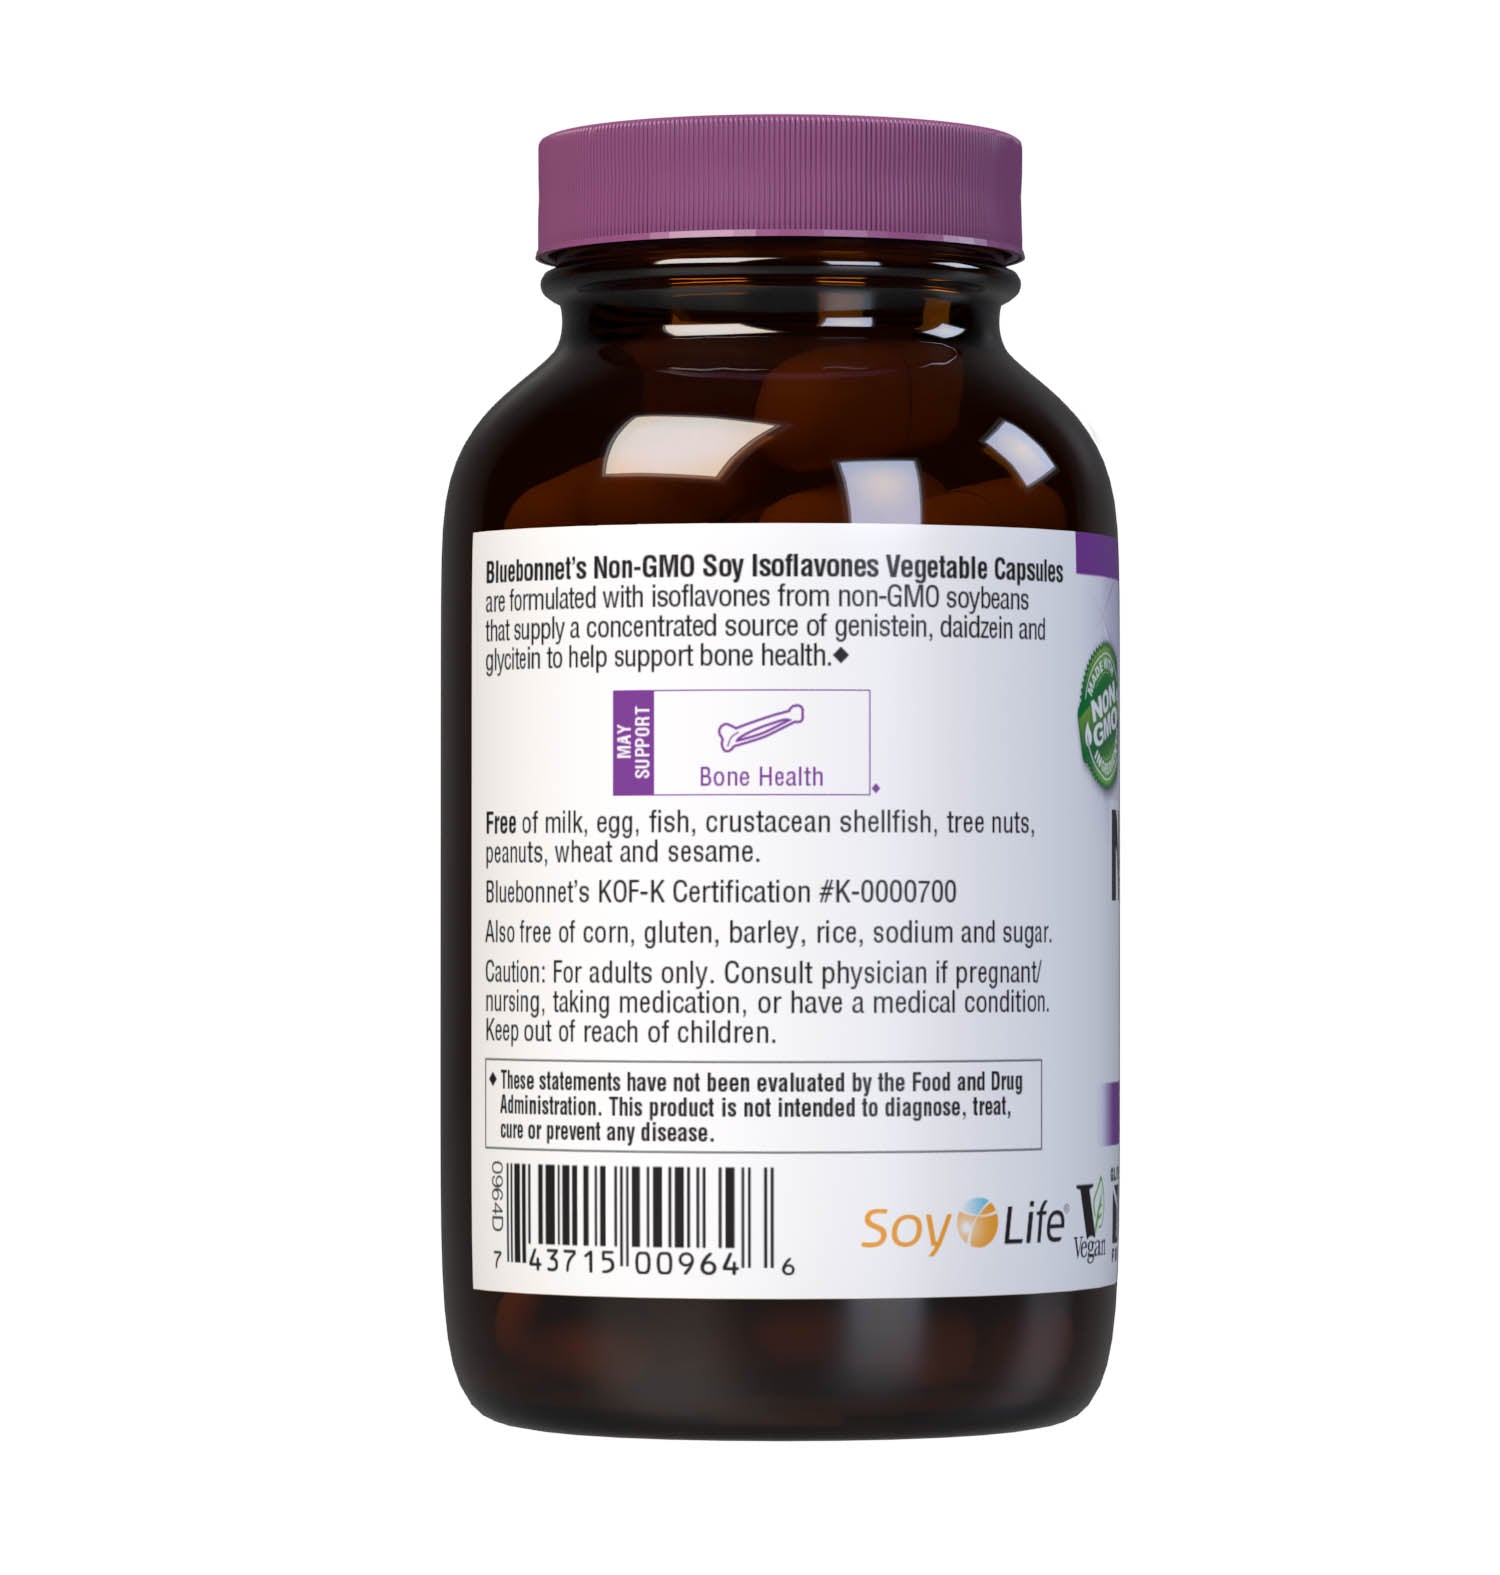 Bluebonnet’s Non-GMO Soy Isoflavones 60 Vegetable capsules contain isoflavones from non-GMO soybeans. This unique phytoestrogen formula supplies a concentrated source of genistein, daidzein and glycitein. Description panel. #size_60 count